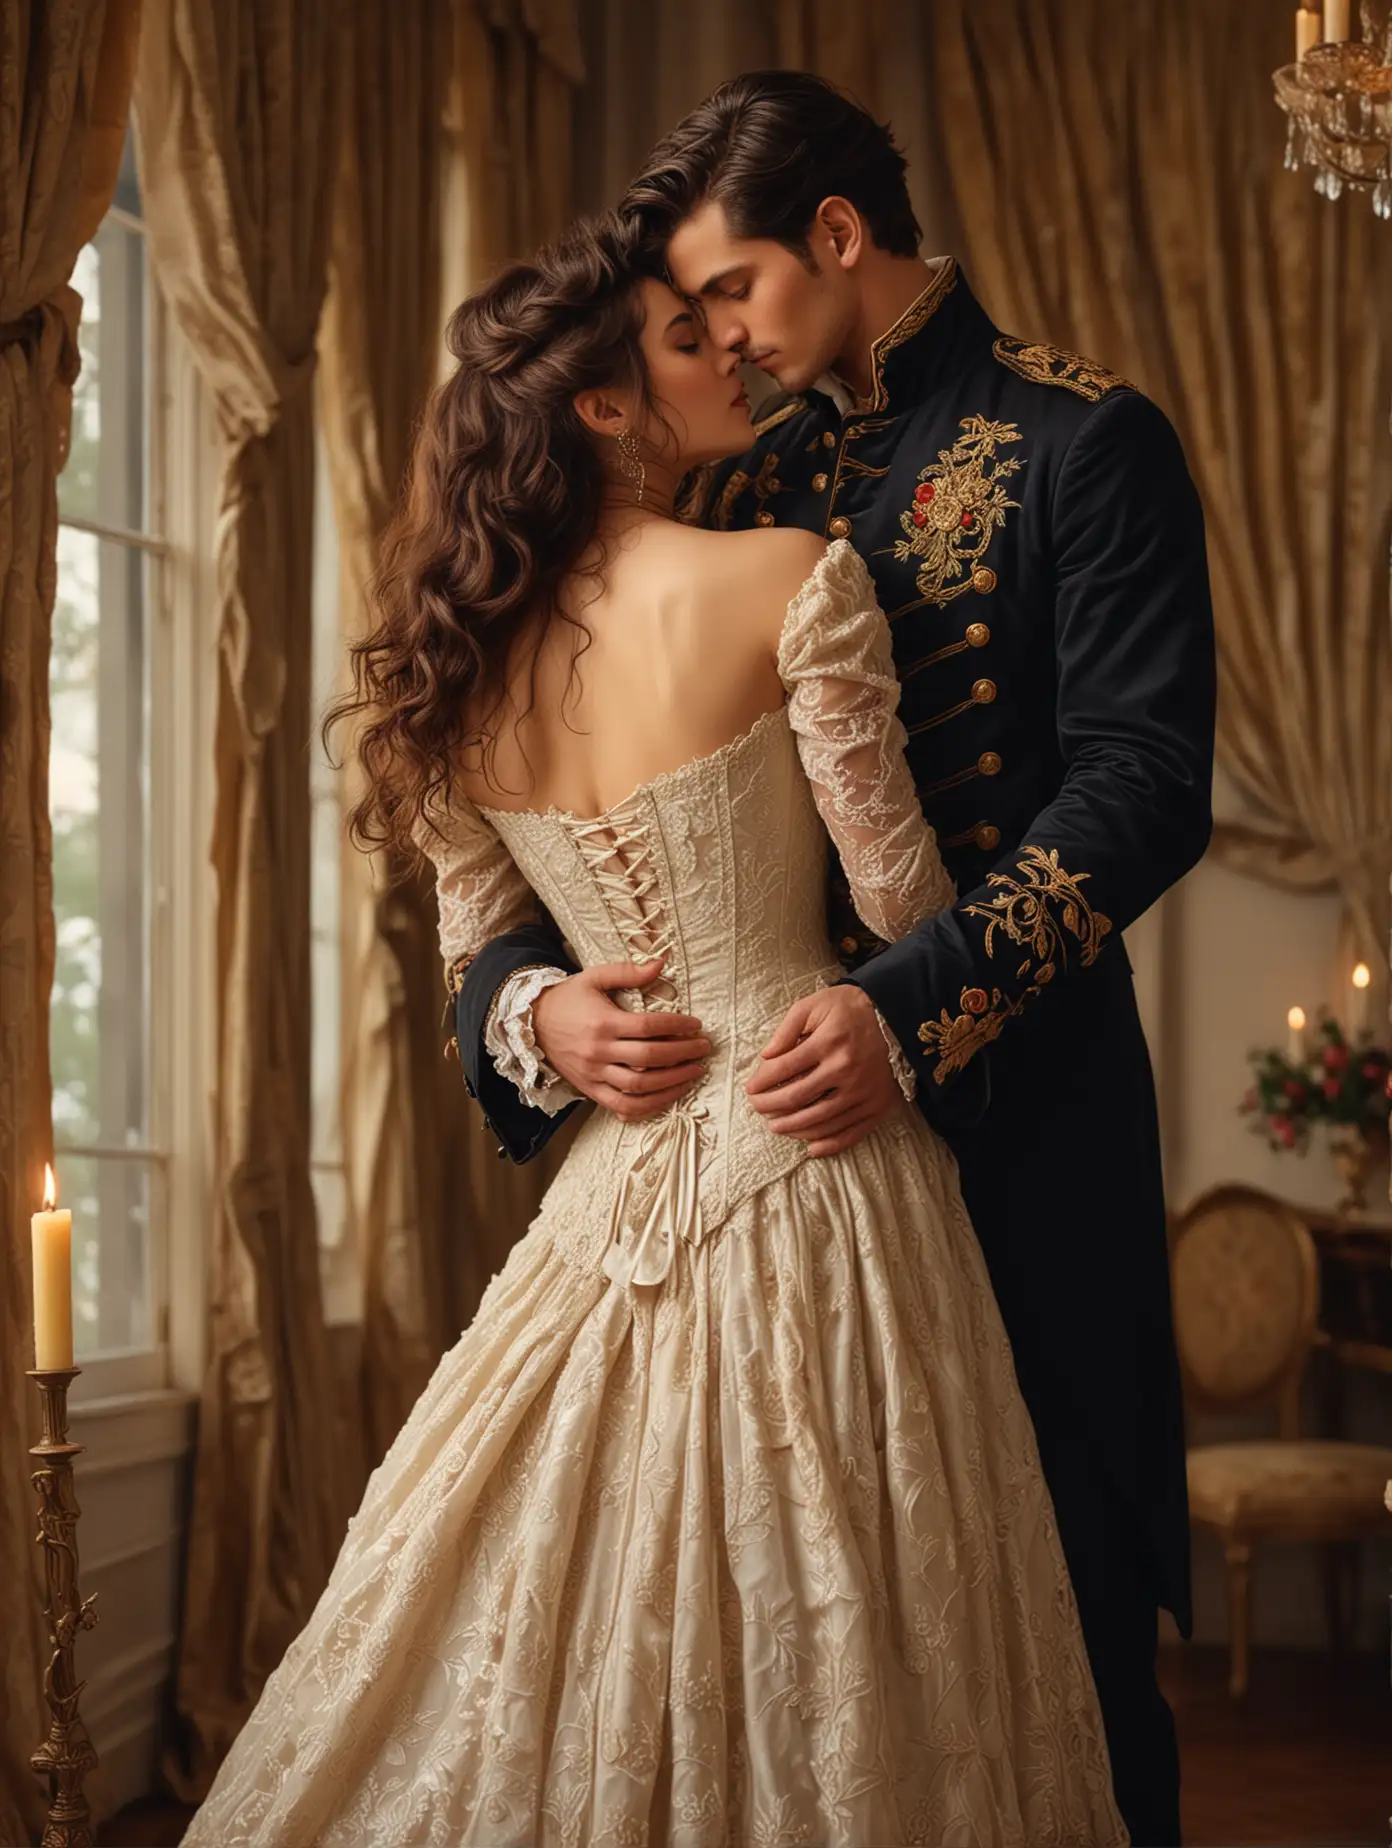 A romantic book cover illustration featuring a couple in an elegant ballroom setting. The woman has long wavy dark hair and is wearing a vintage lace corset dress with floral embroidery. The man, with short dark hair, wears an ornate military-style jacket with intricate gold detailing. They are in a close, intimate pose, standing upright, with the woman looking slightly upward and the man gently leaning towards her. The background includes a large window with warm, soft lighting, casting a golden glow. Candles and drapes add to the romantic atmosphere.